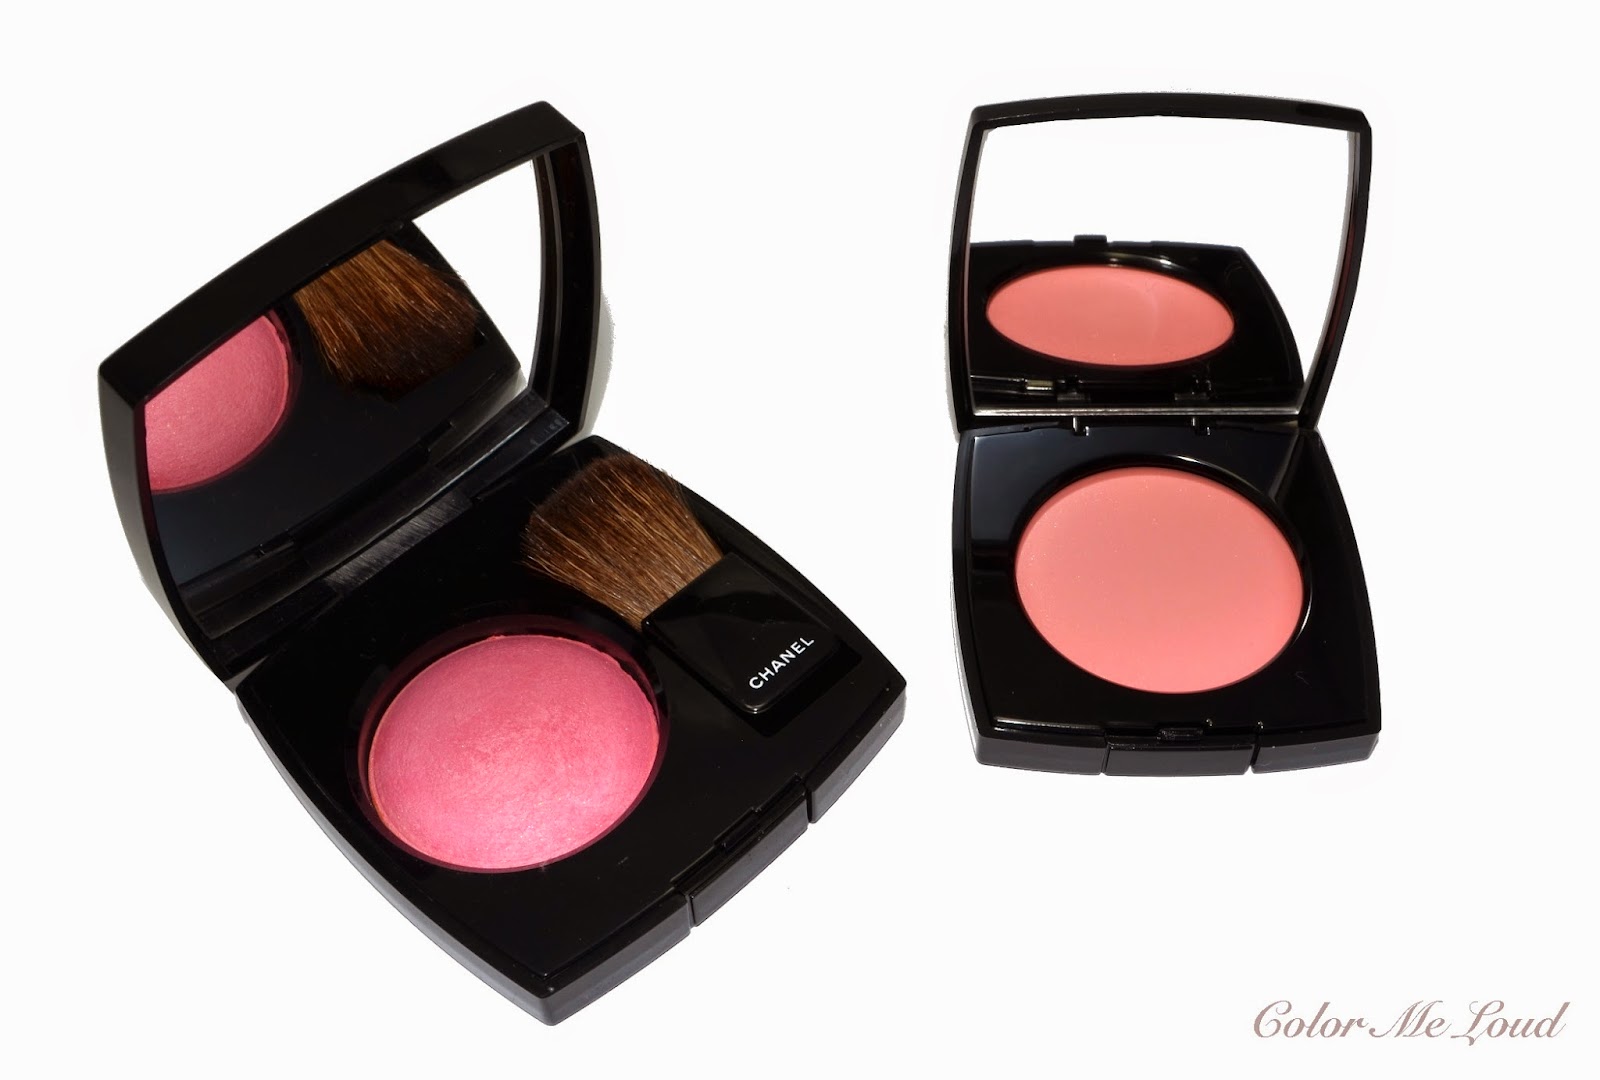 Chanel Elegance (370) Joues Contraste Blush Review & Swatches